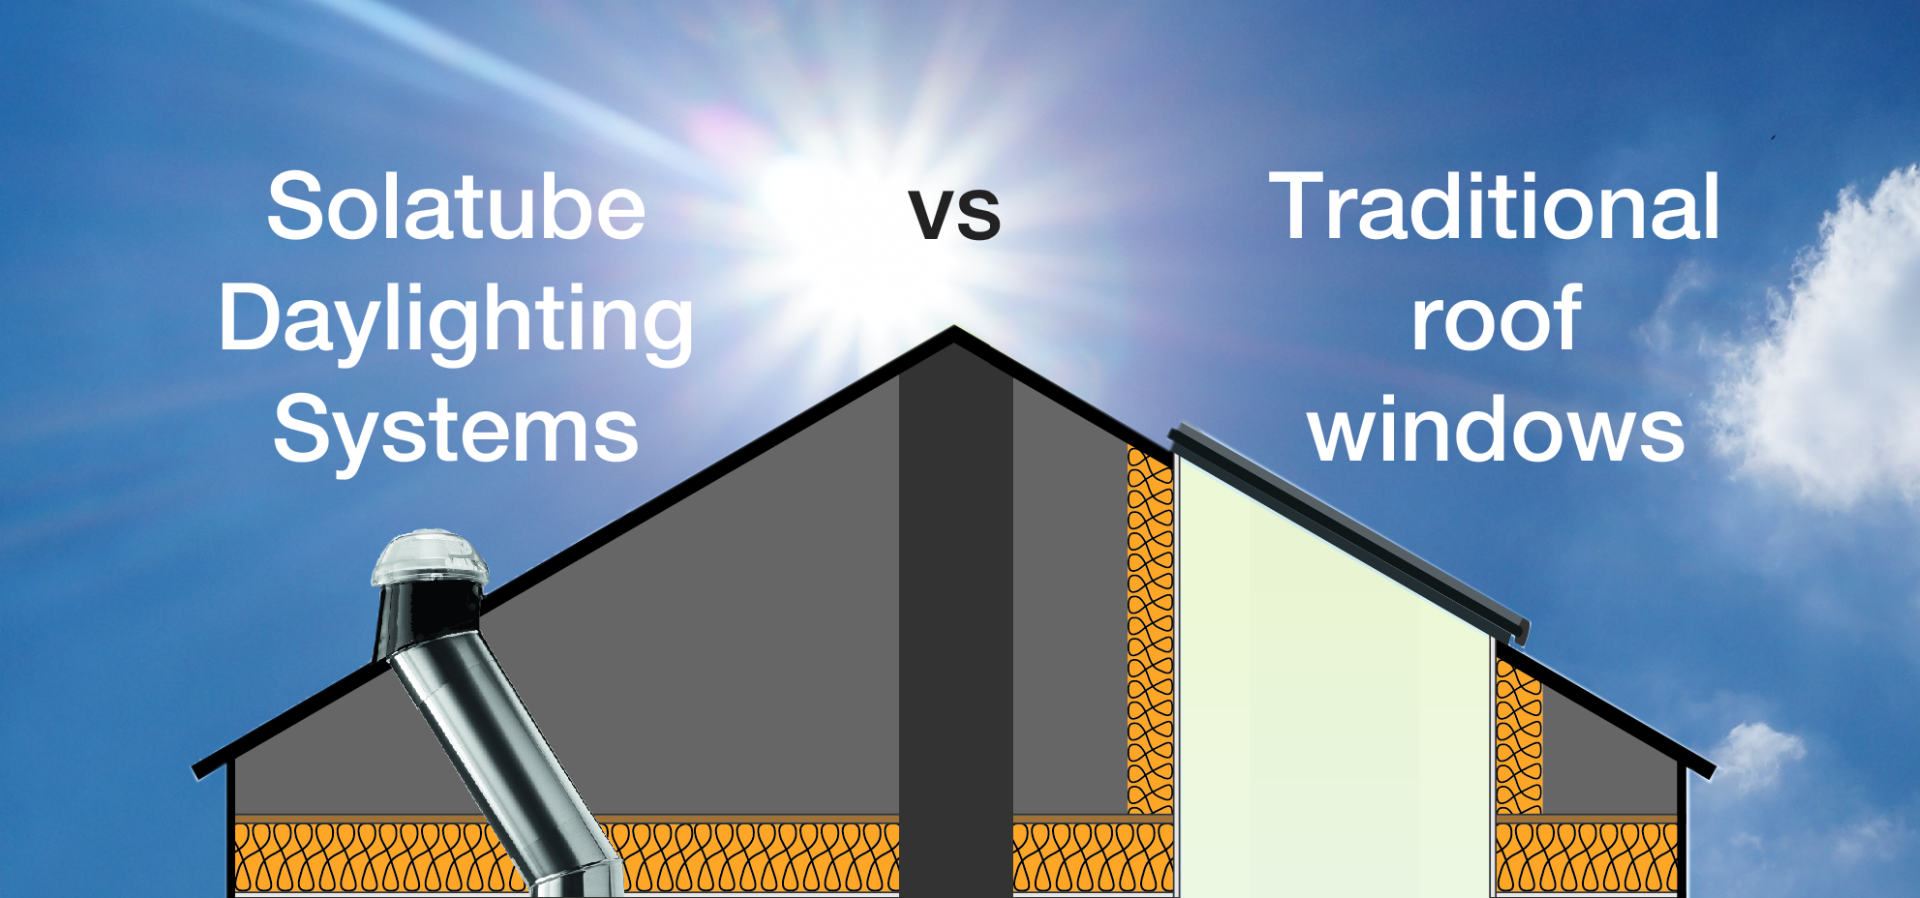 Solatube Daylighting Systems vs Traditional Roof Windows